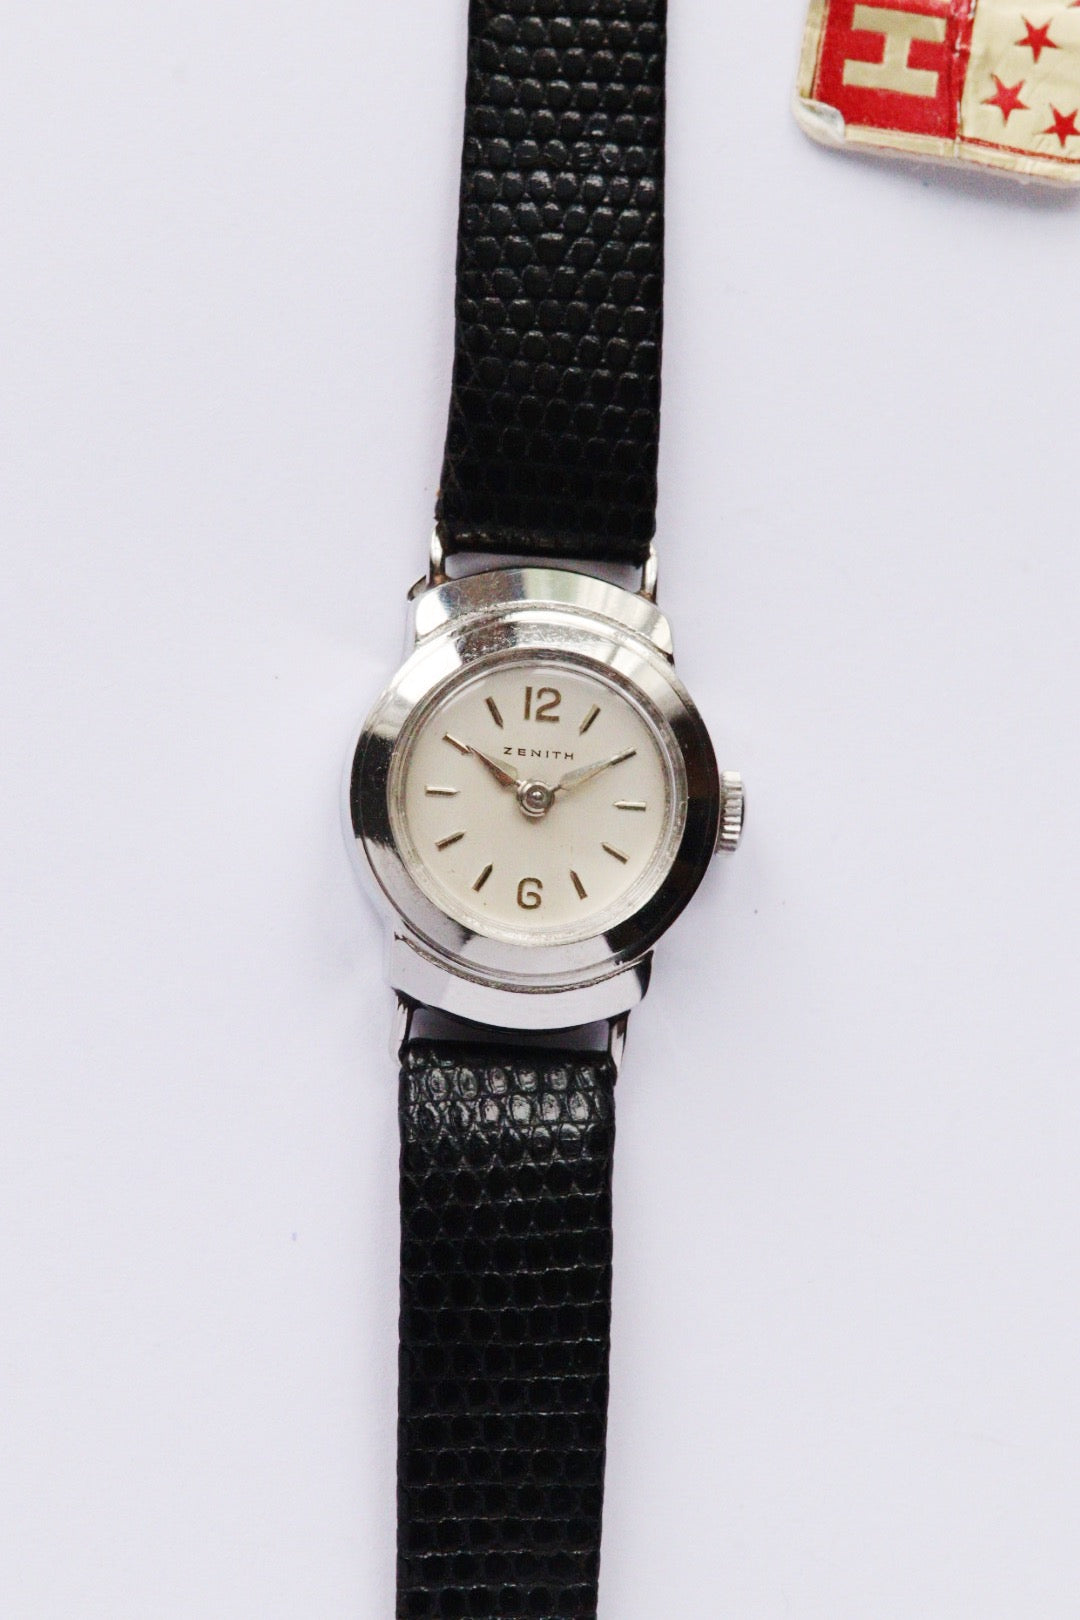 Lady Zenith 1950's — Cool Vintage Watches